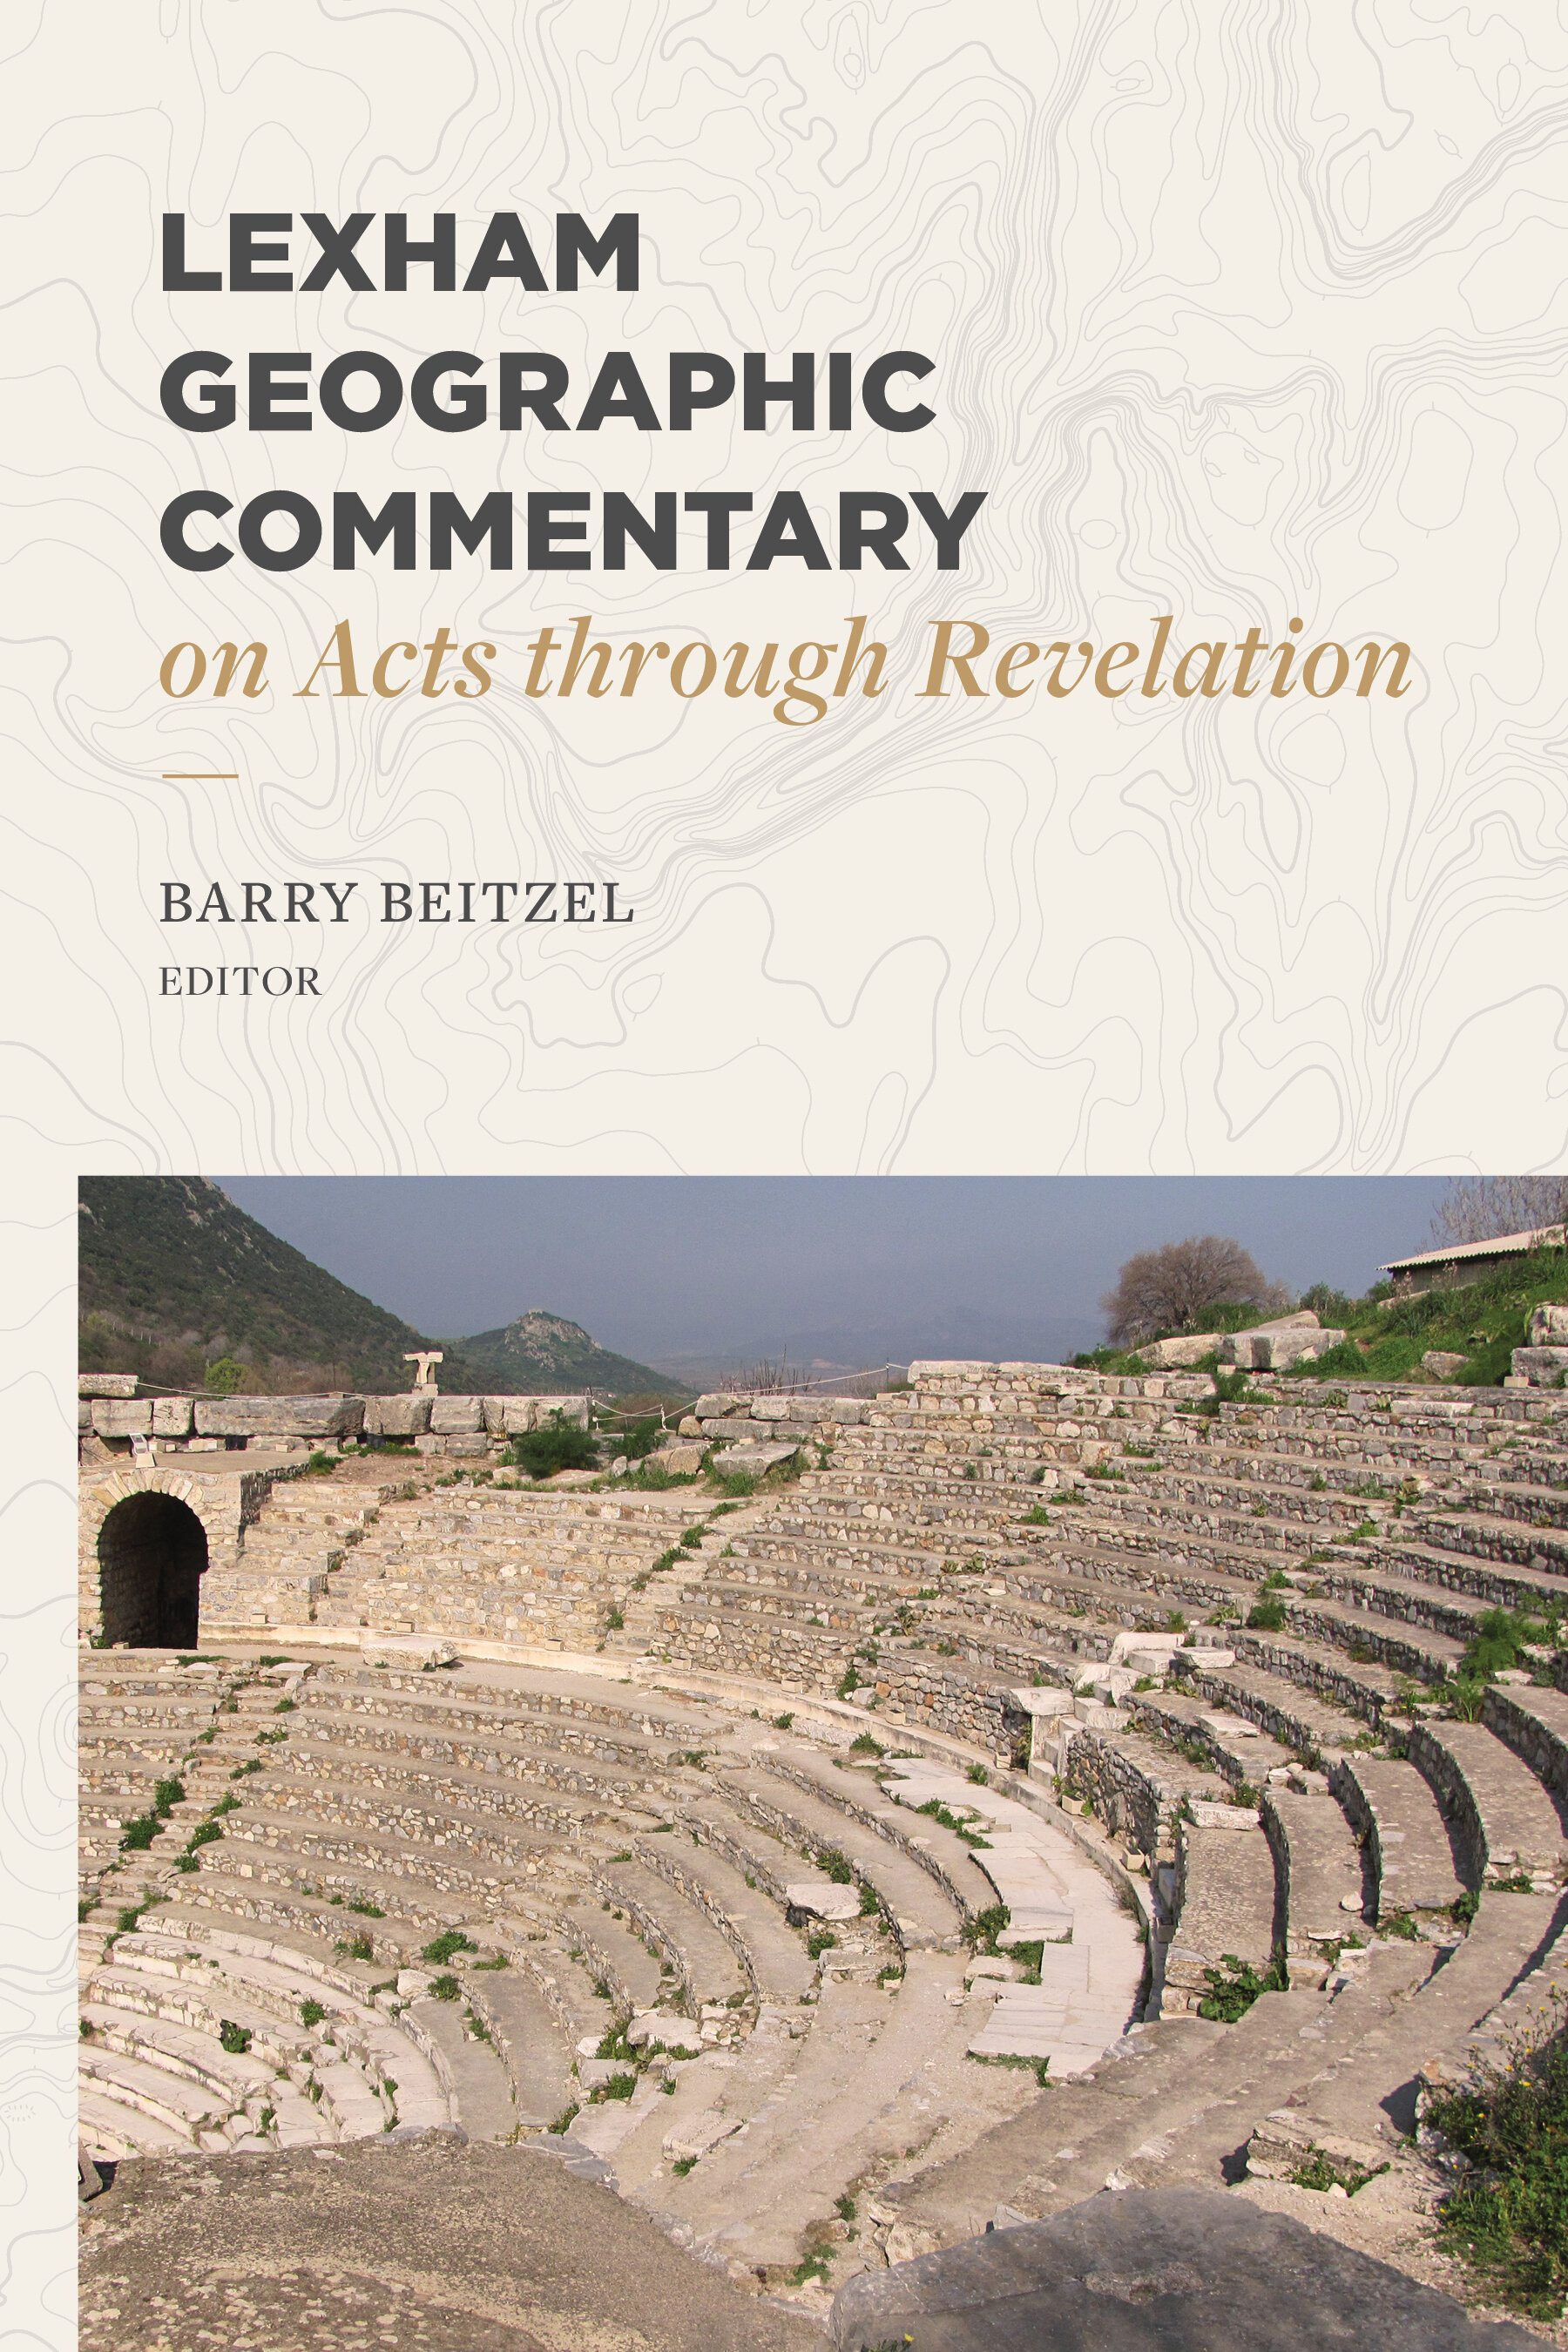 Lexham Geographic Commentary on Acts through Revelation